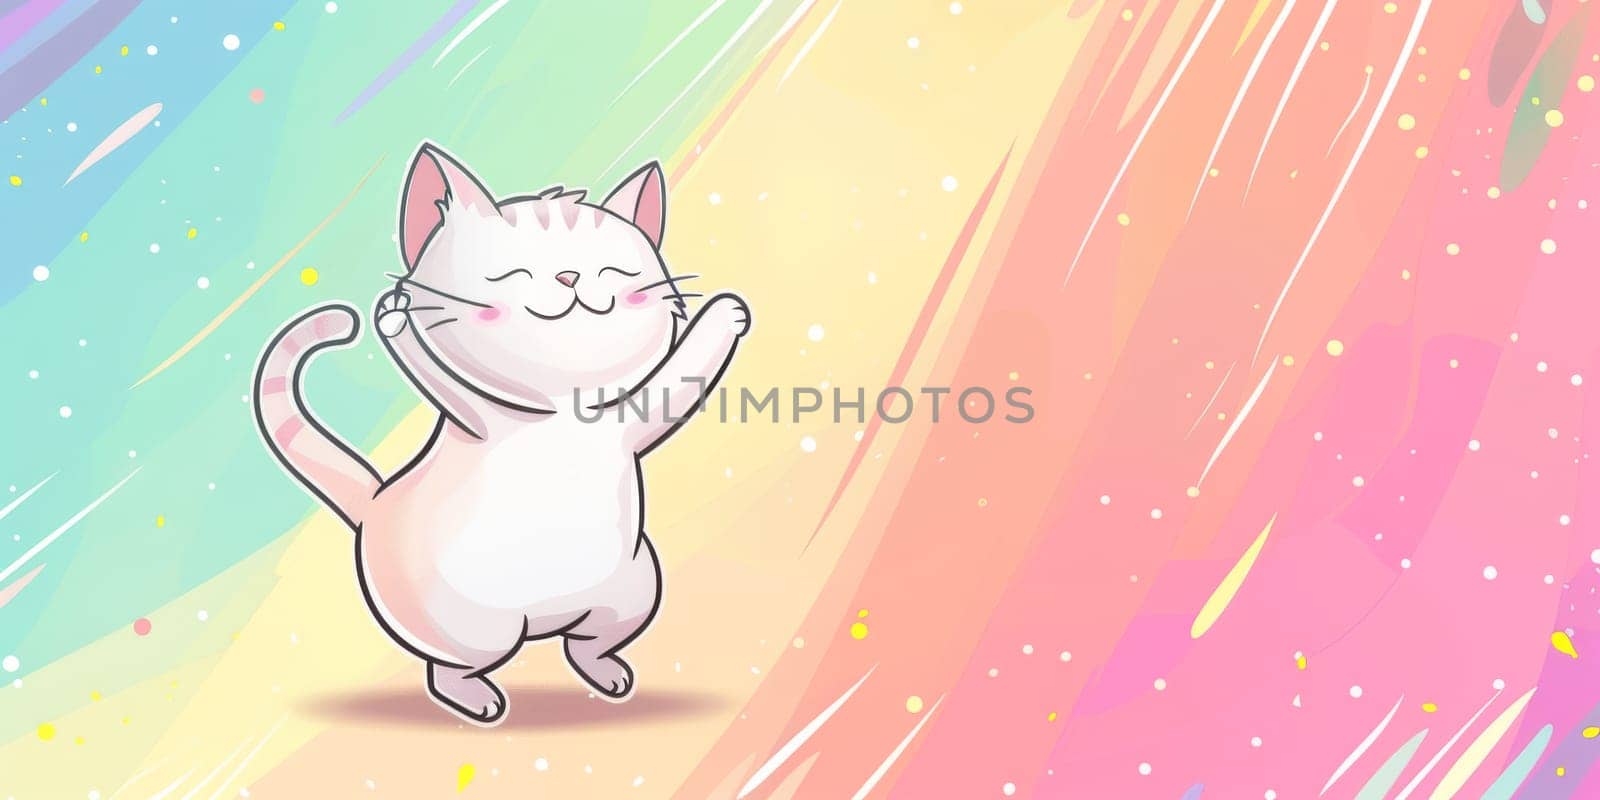 Cartoon kitty on the left side dancing on pastel colorful background